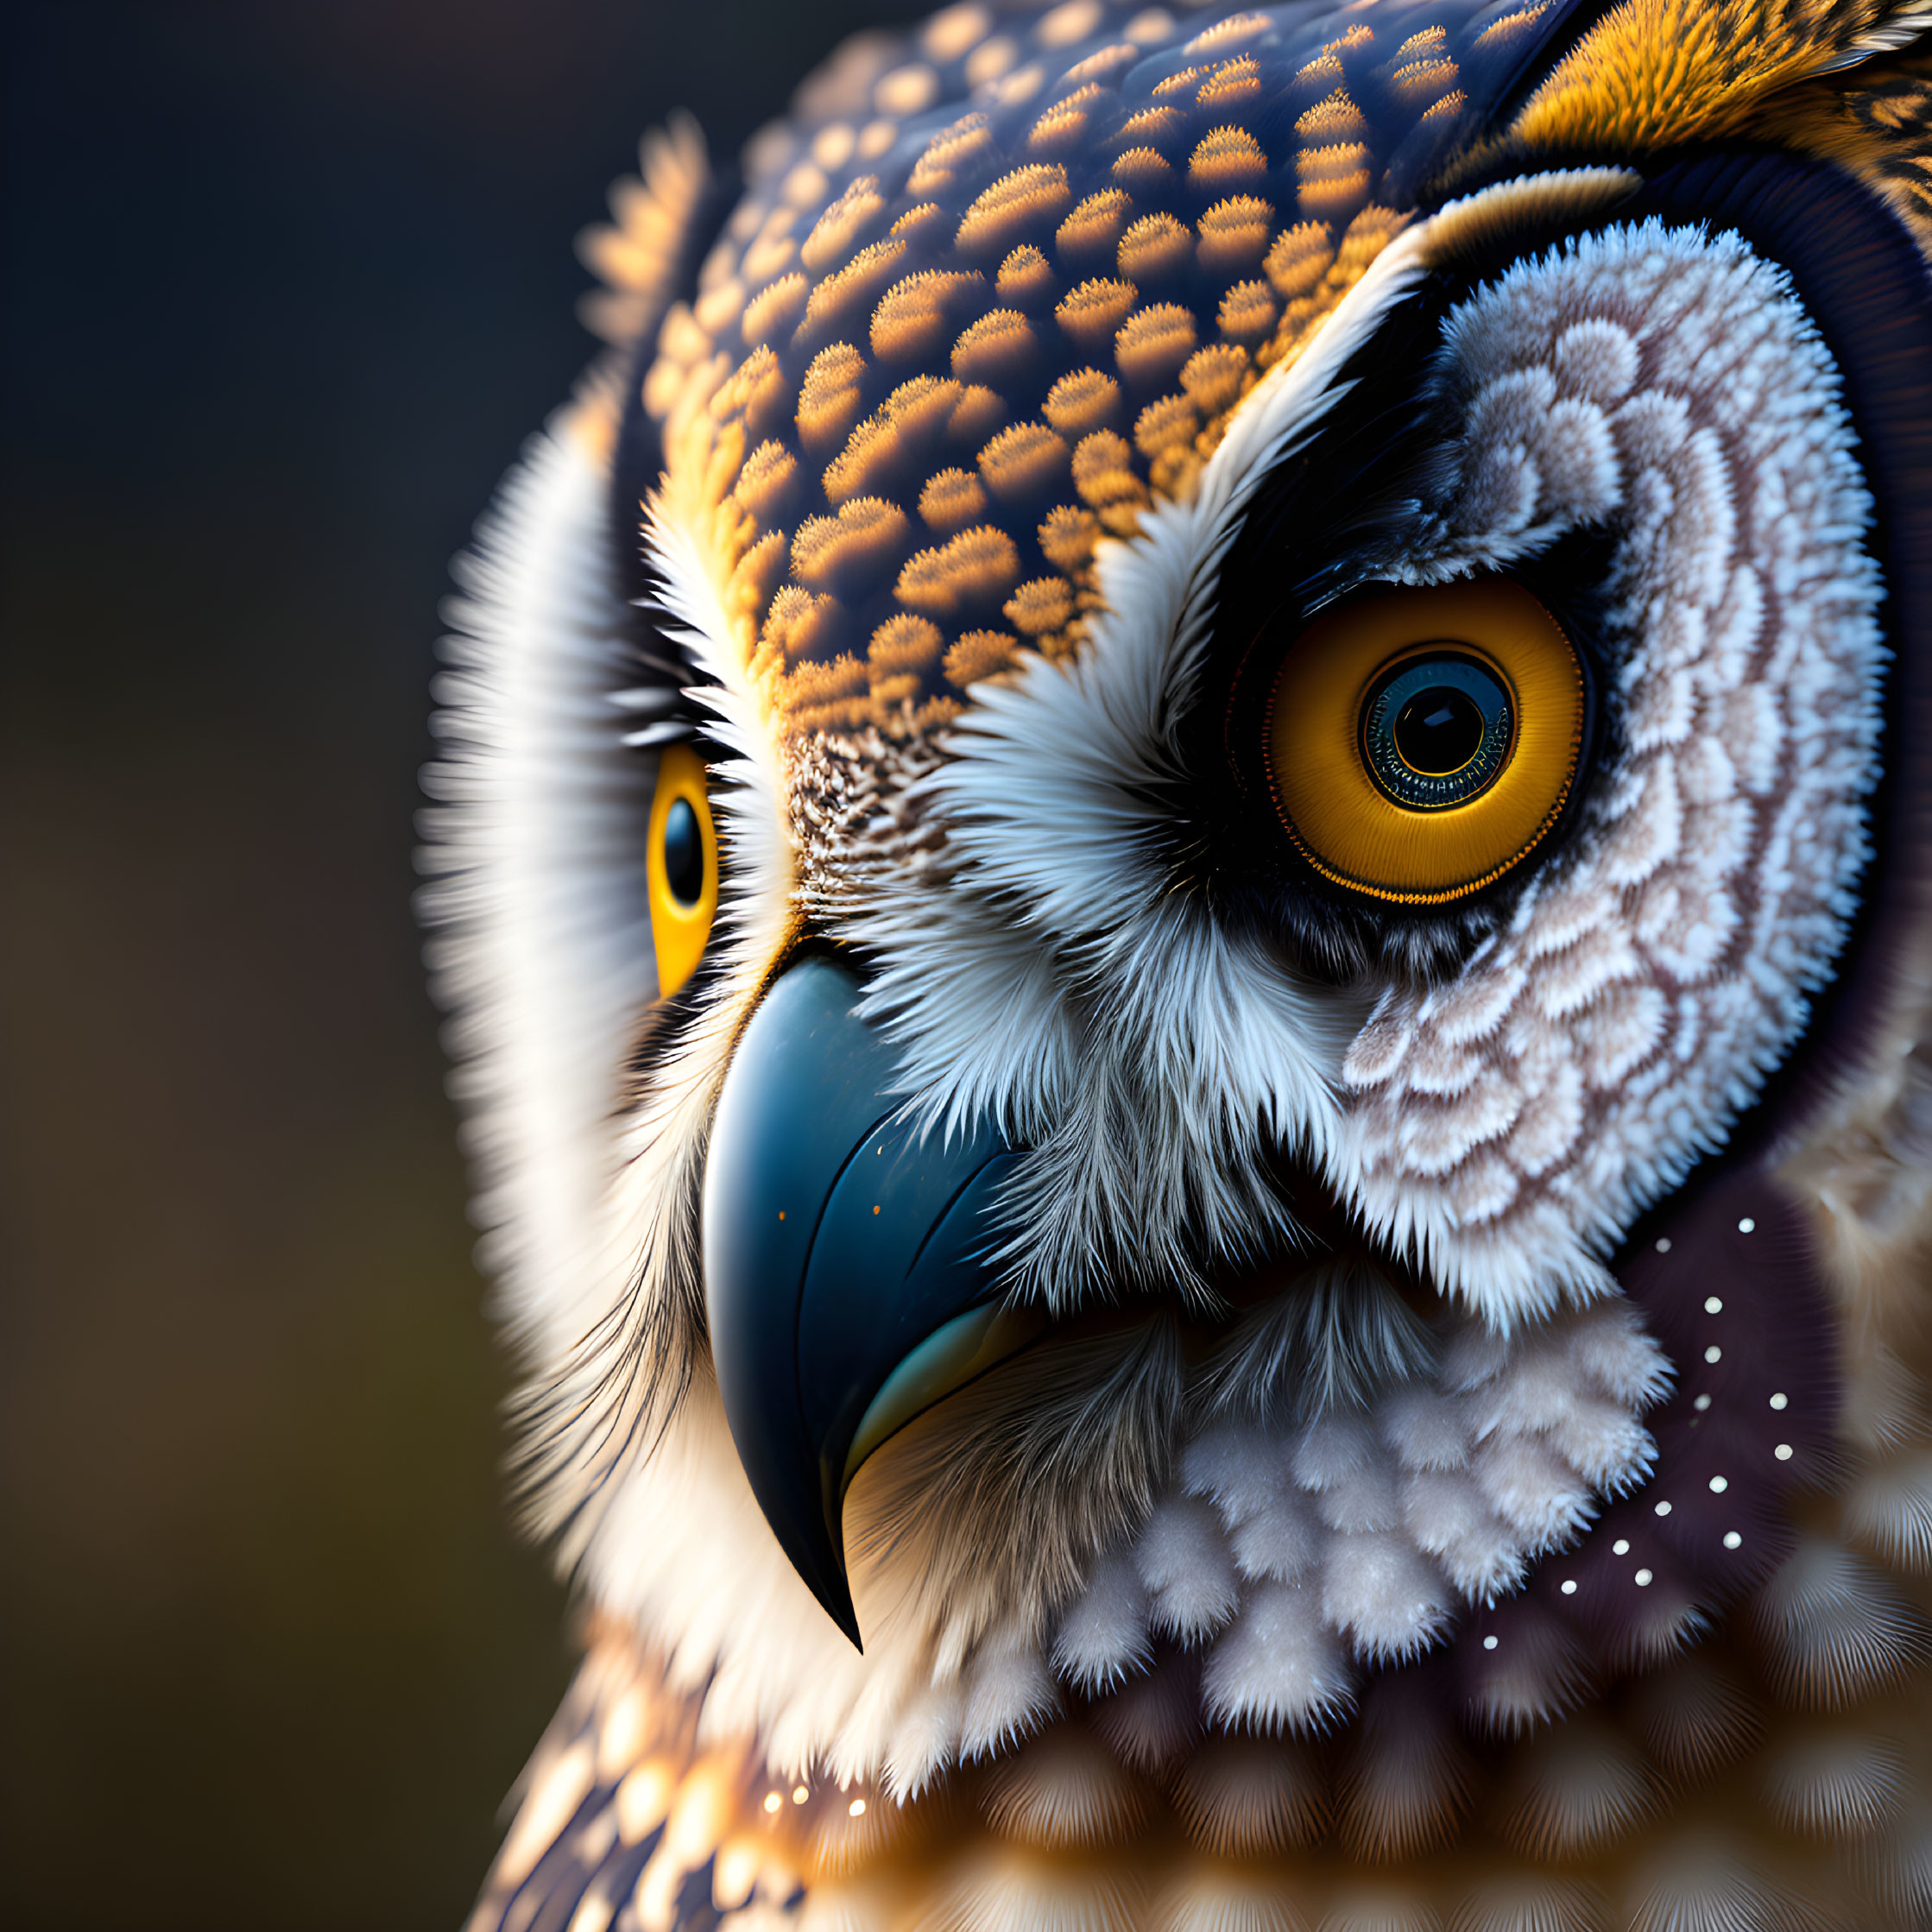 Detailed owl feathers and yellow eyes in close-up view